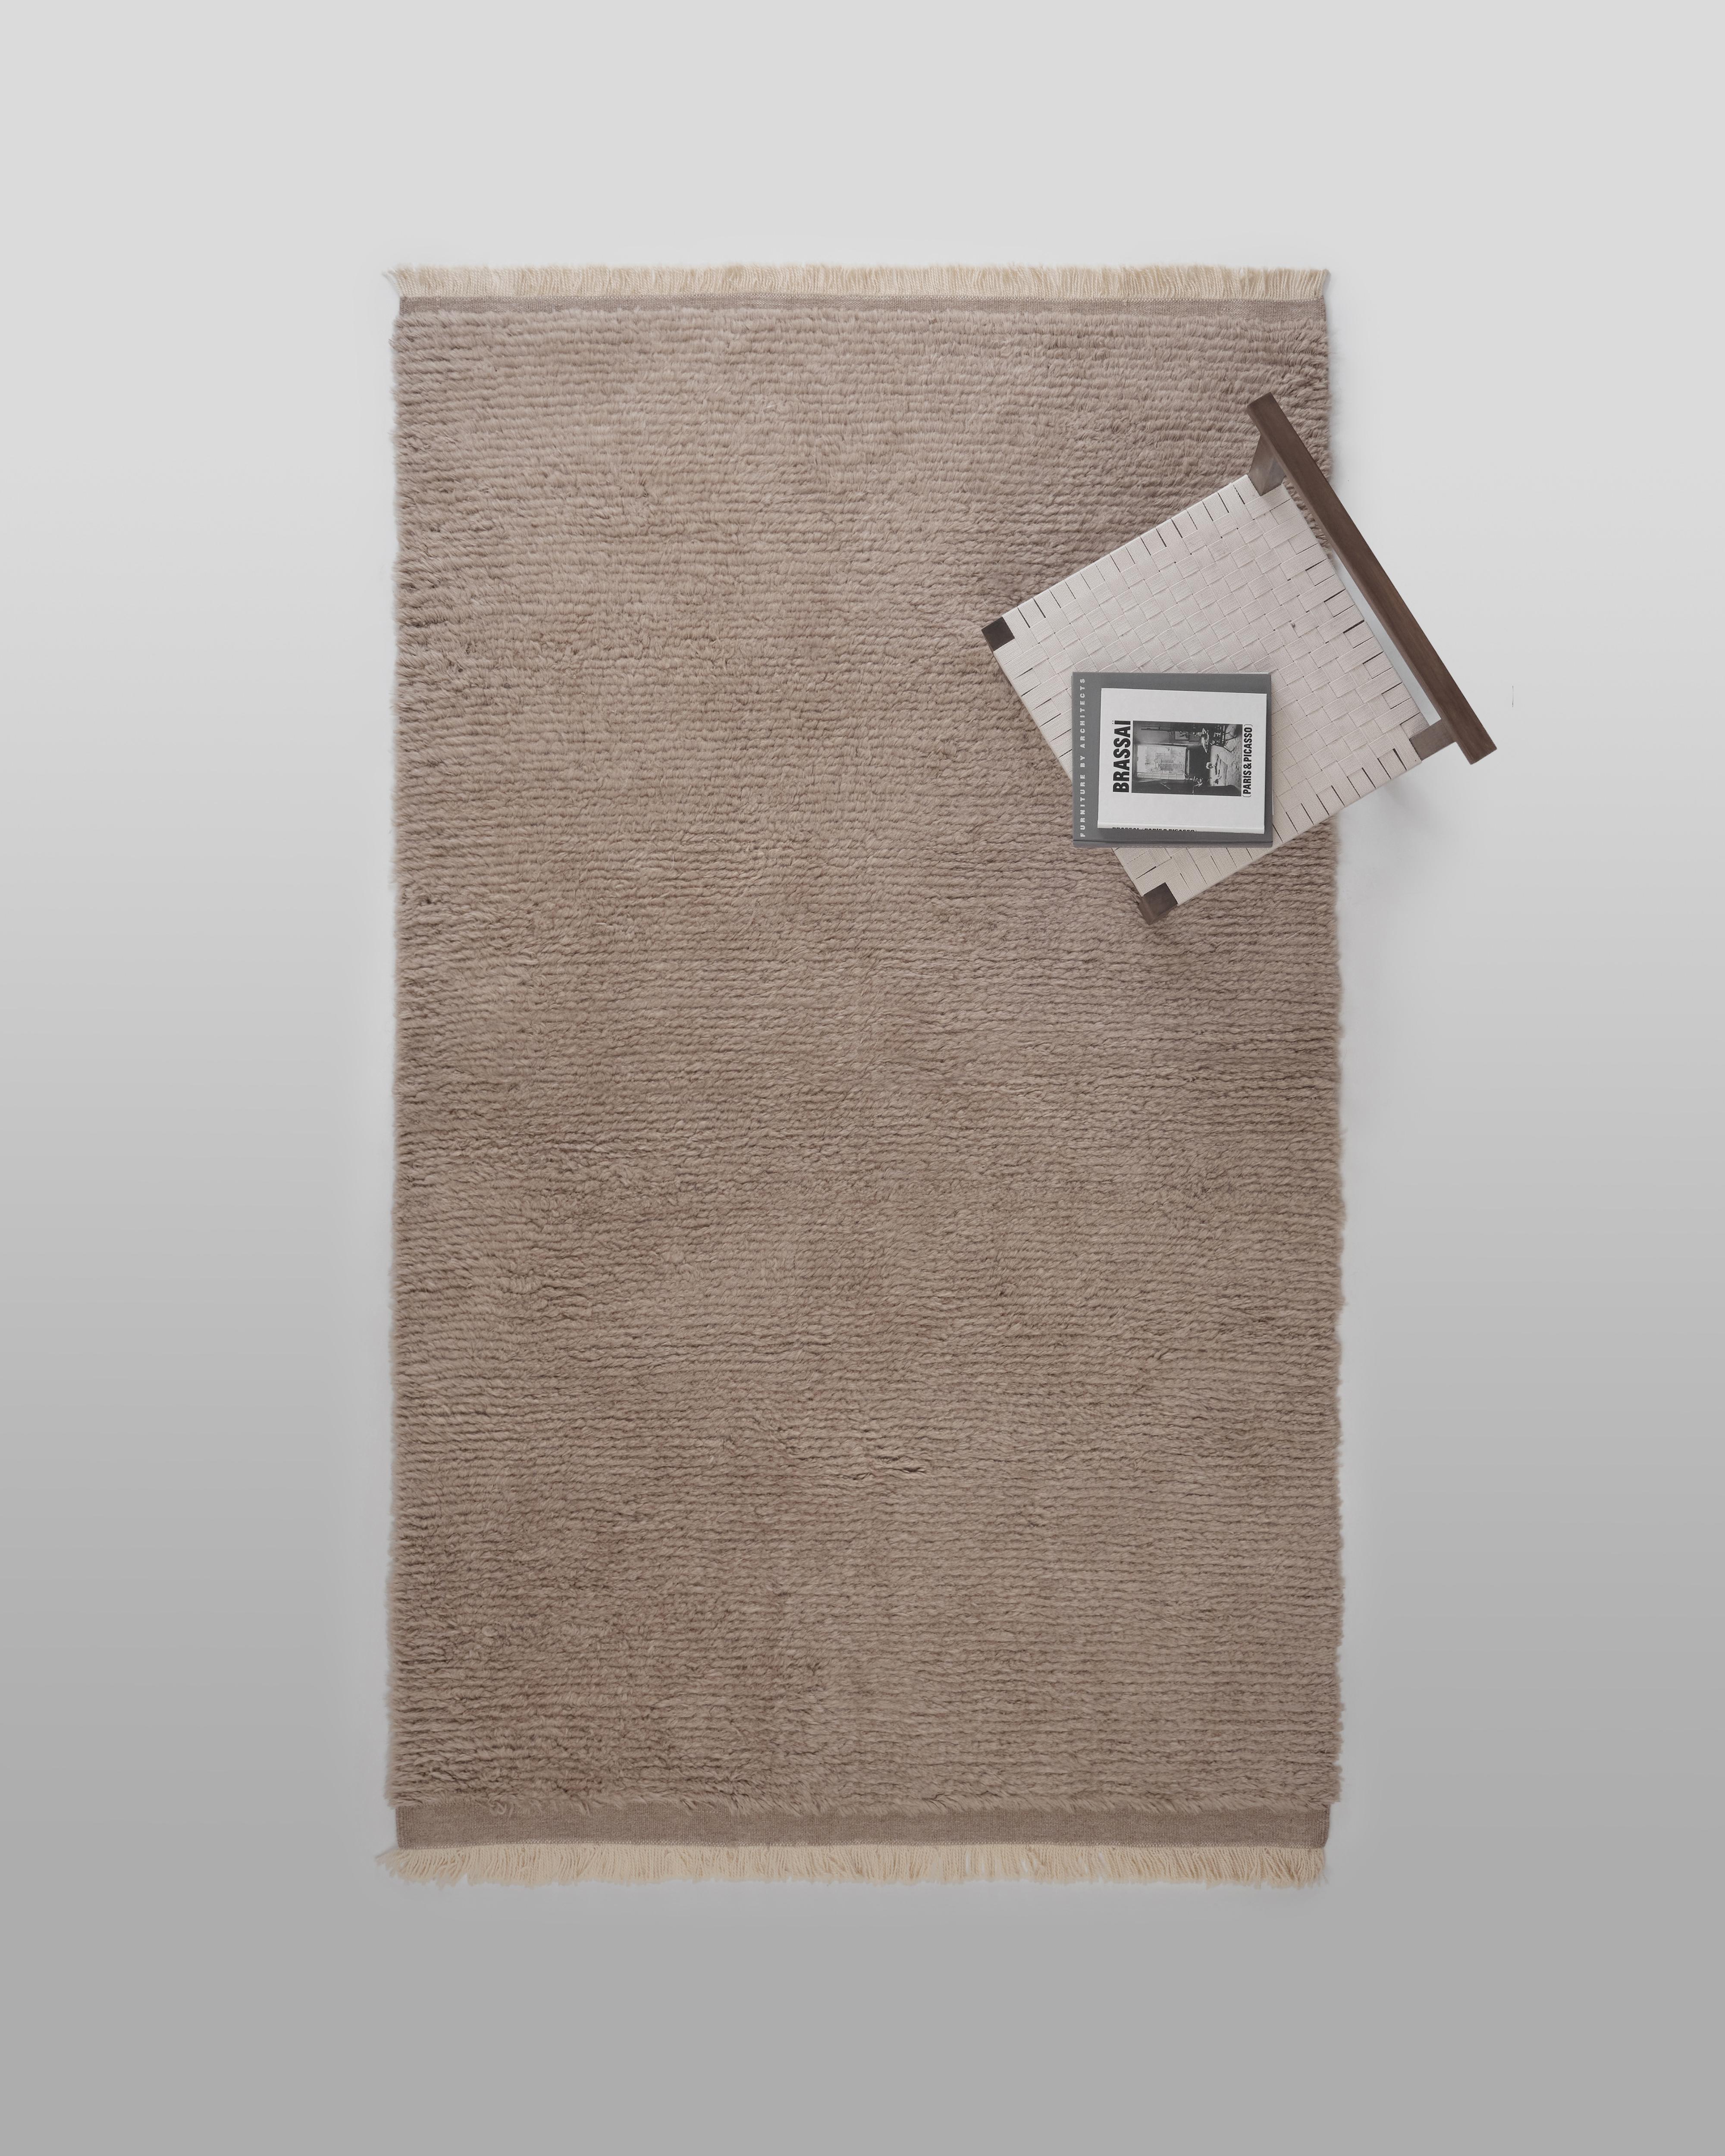 The Forsyth Woolly Shag Rug - Short Pile, Taupe, 6x9 For Sale 2